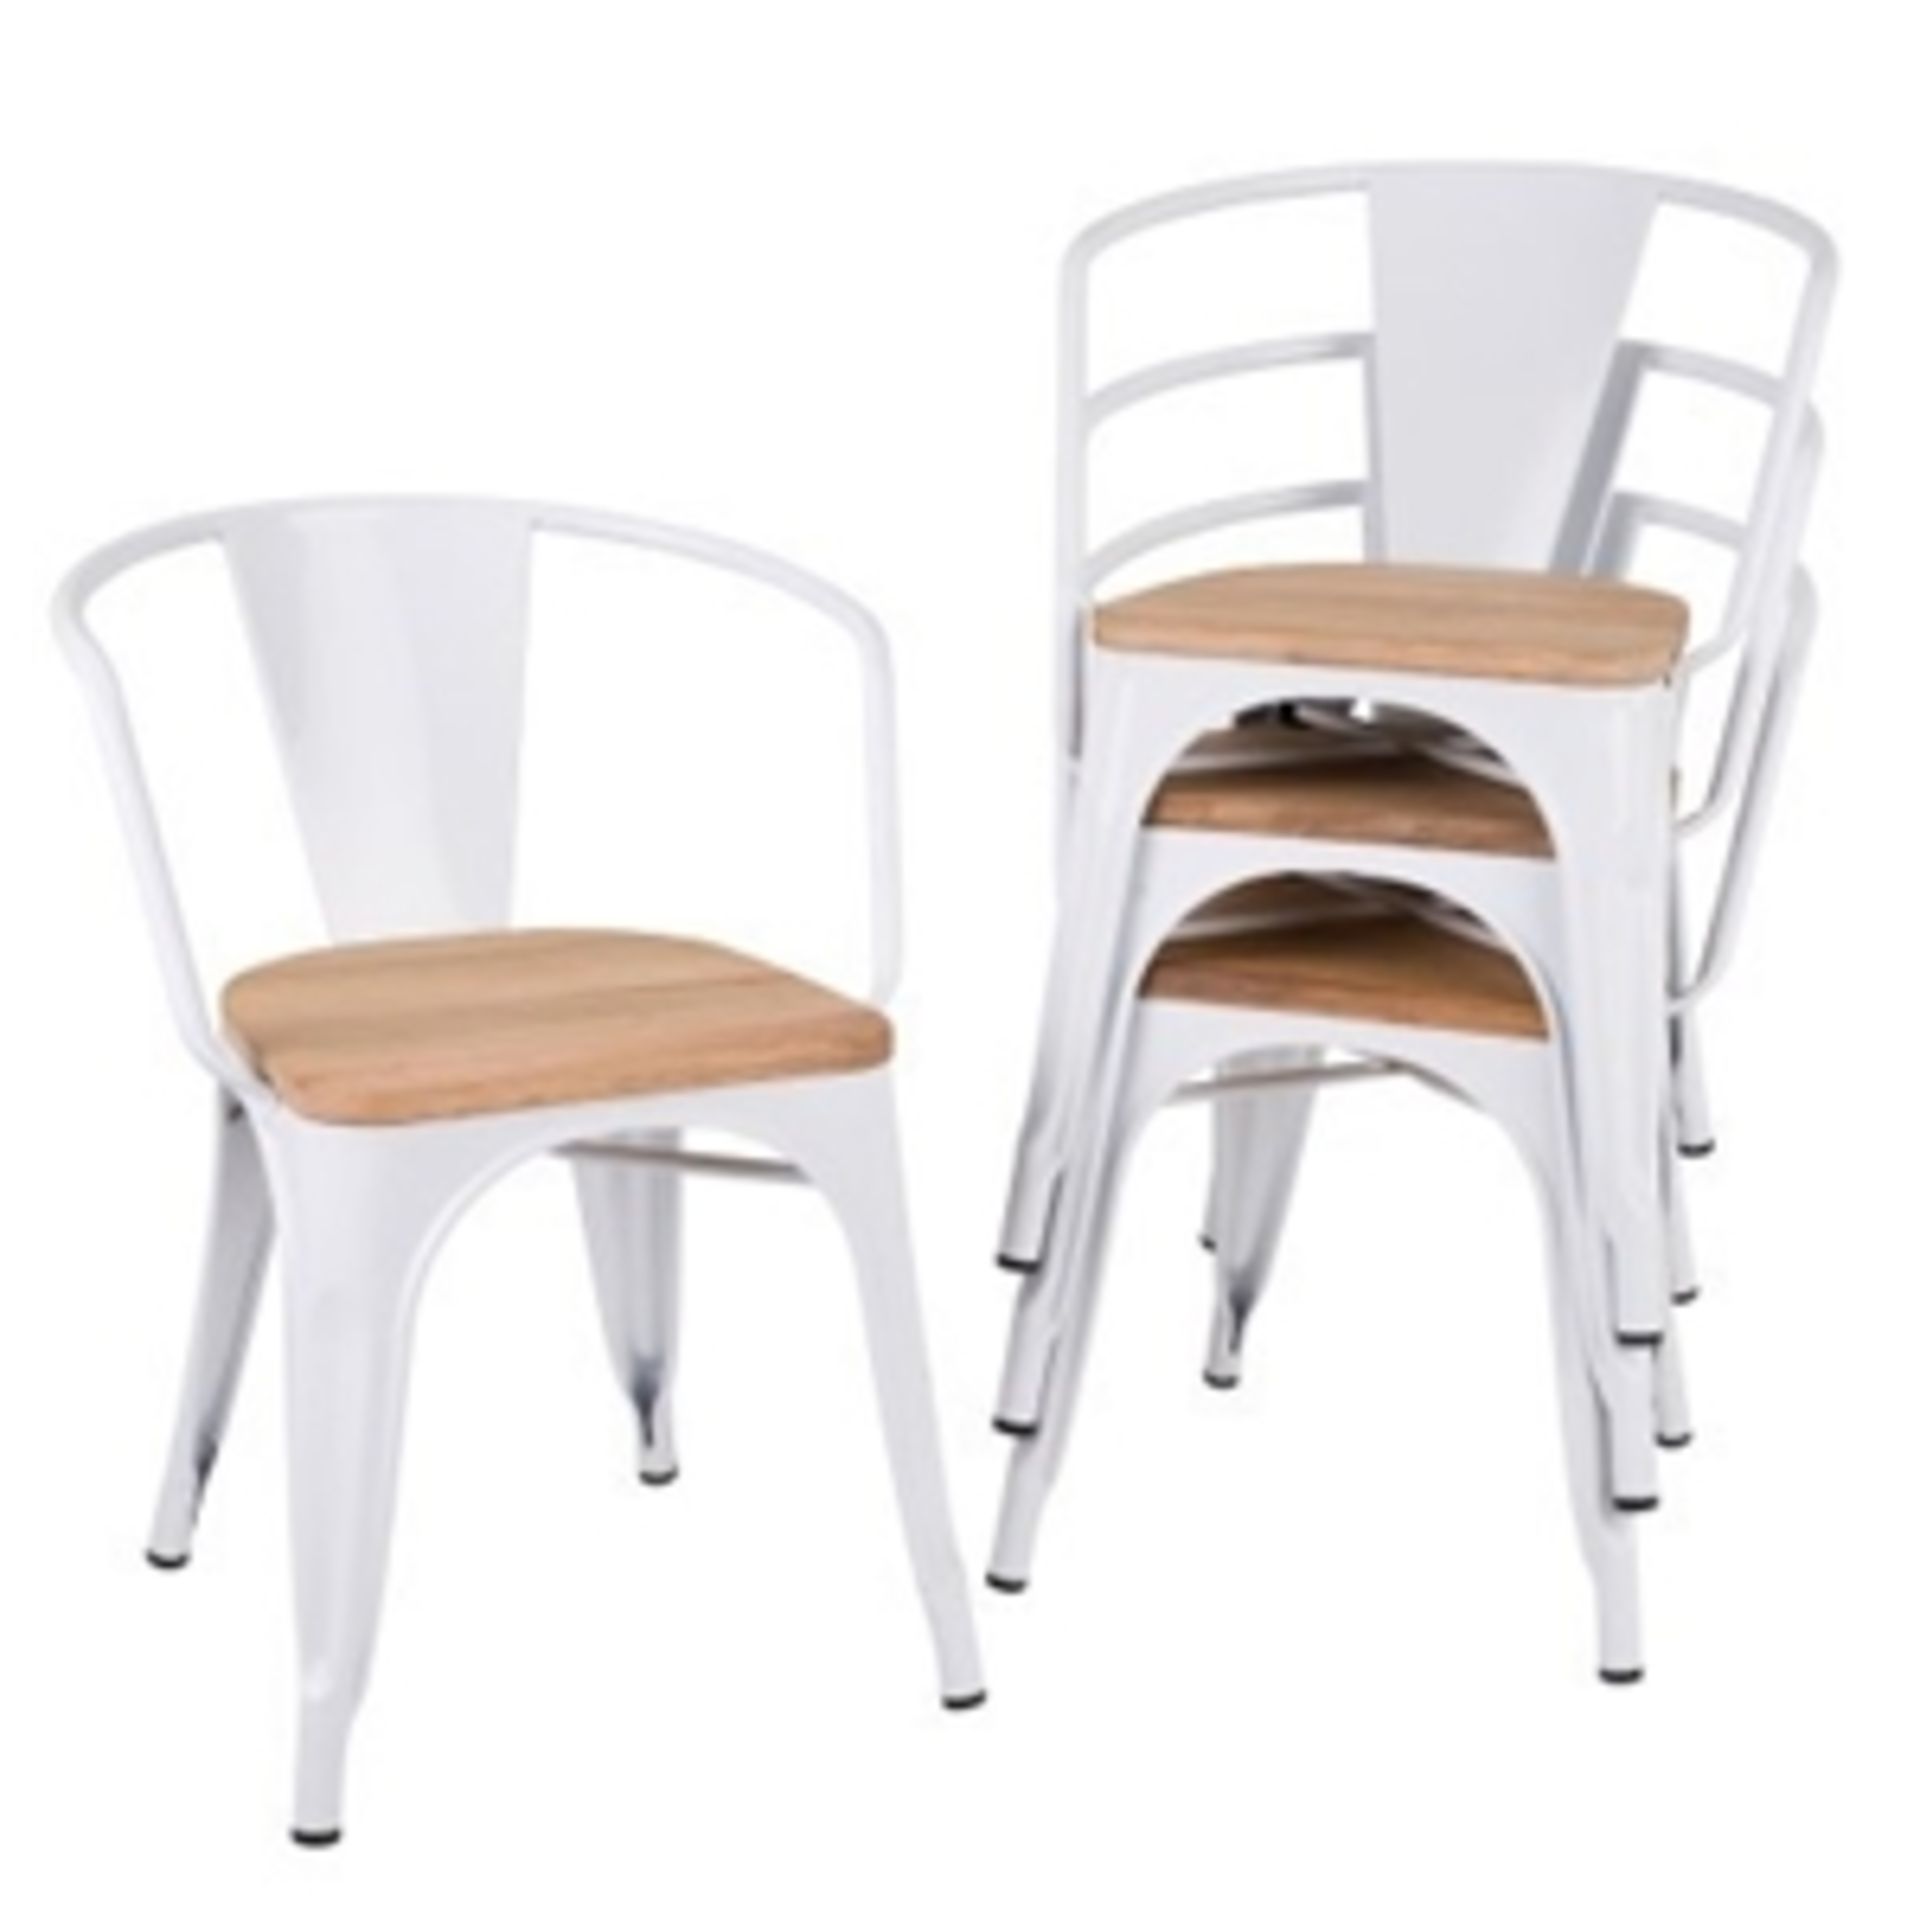 1 x Tolix Industrial Style Outdoor Bistro Table and Chair Set in White- Includes 1 x Table and 4 x - Image 7 of 8